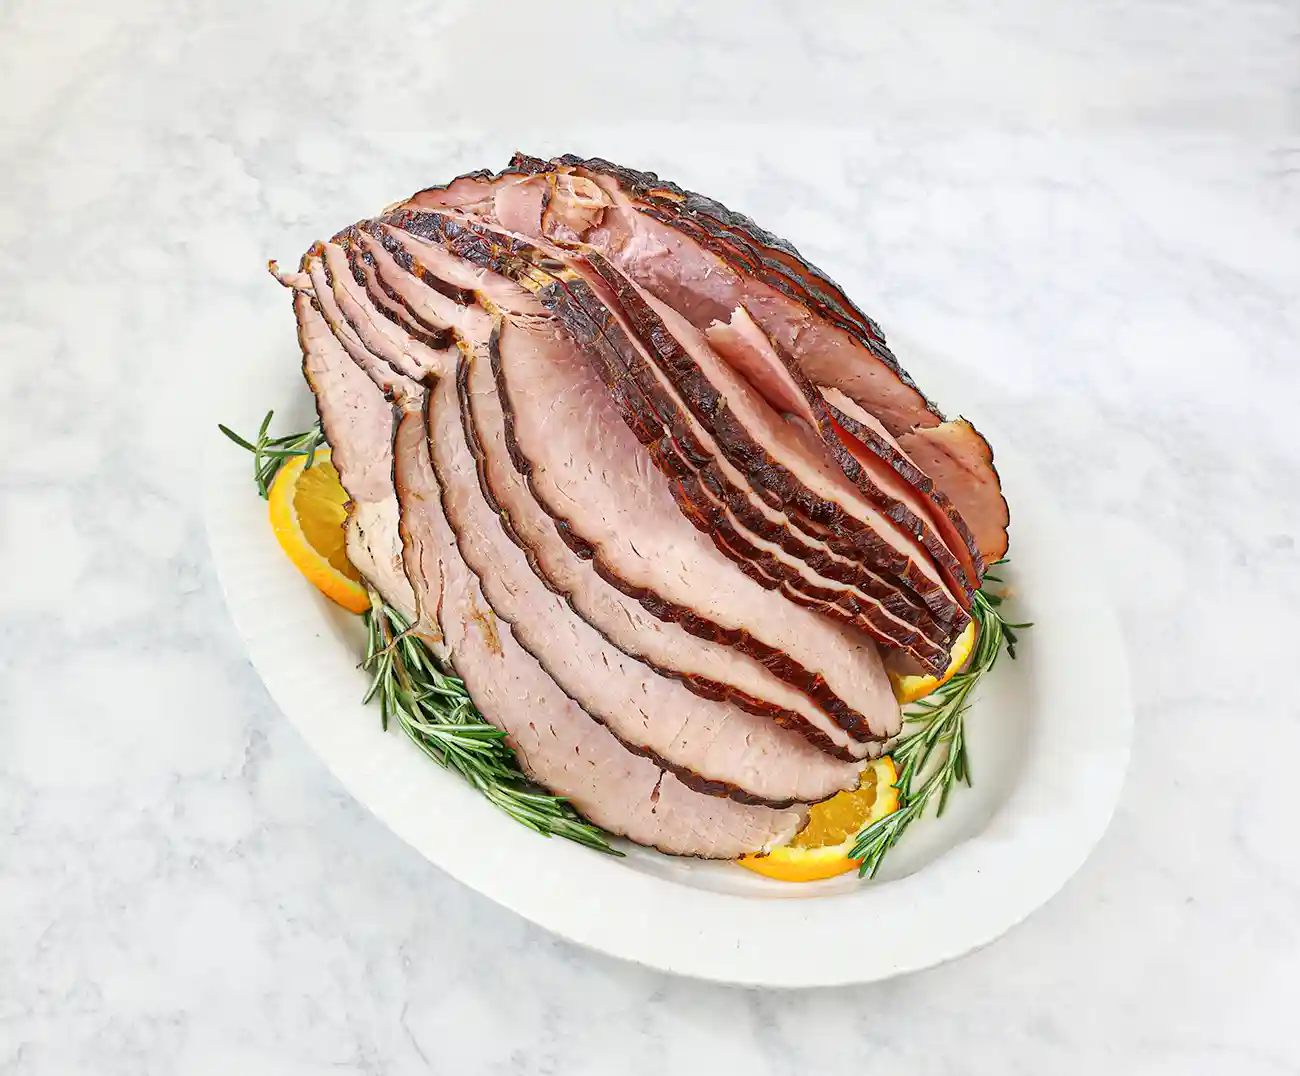 Hillshire Farm® Bone-In Brown Sugar Cured Spiral Sliced Half Ham with Natural Juices (4 Count)_image_01